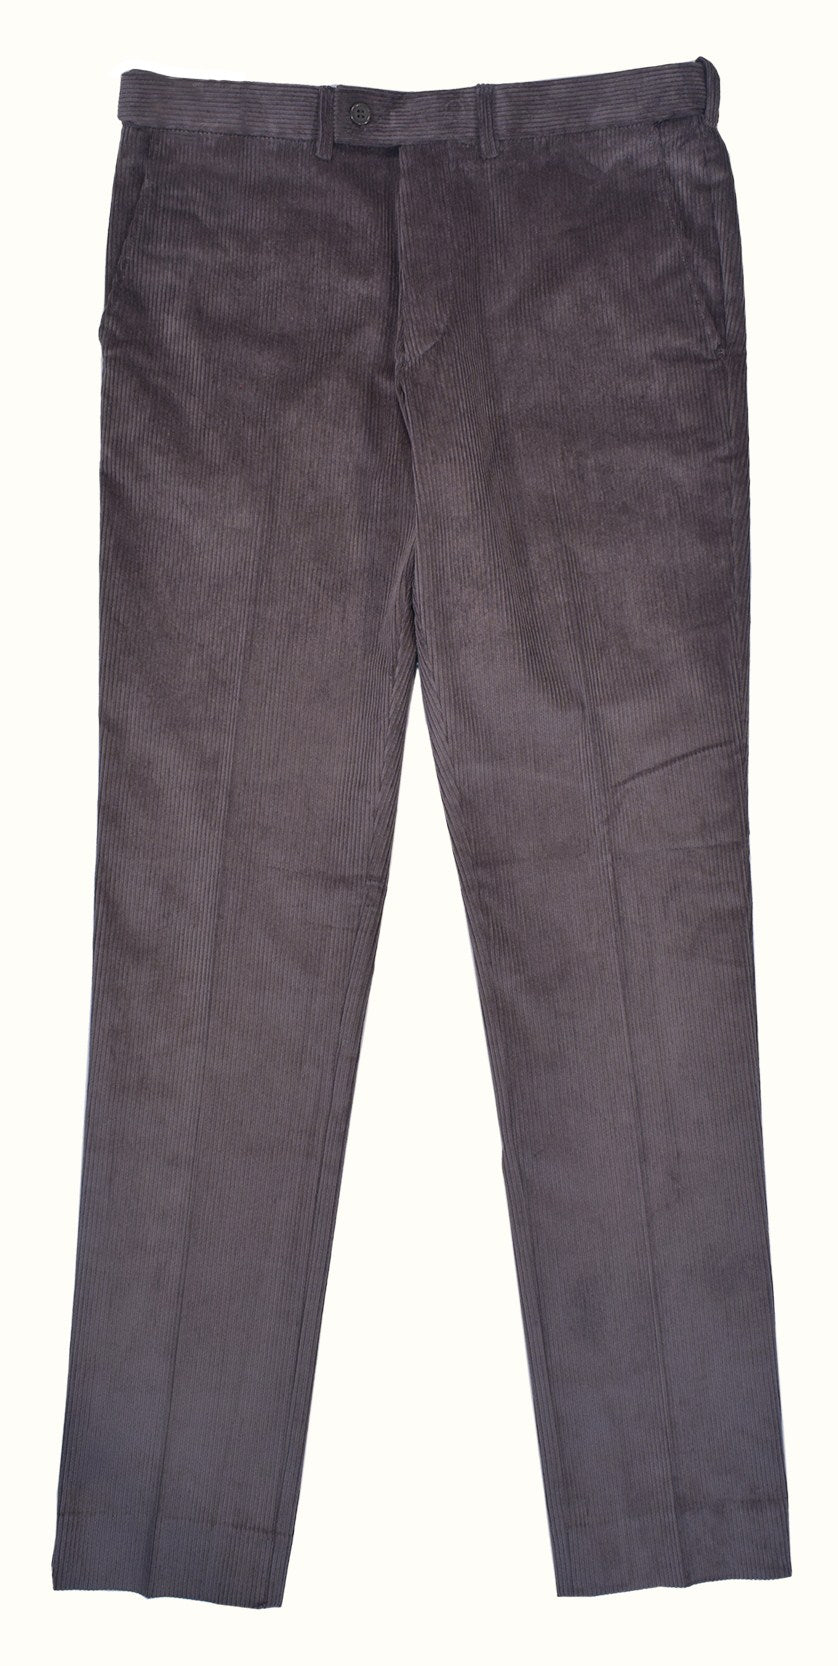 Country Look - Texel Cord Trouser - Charcoal